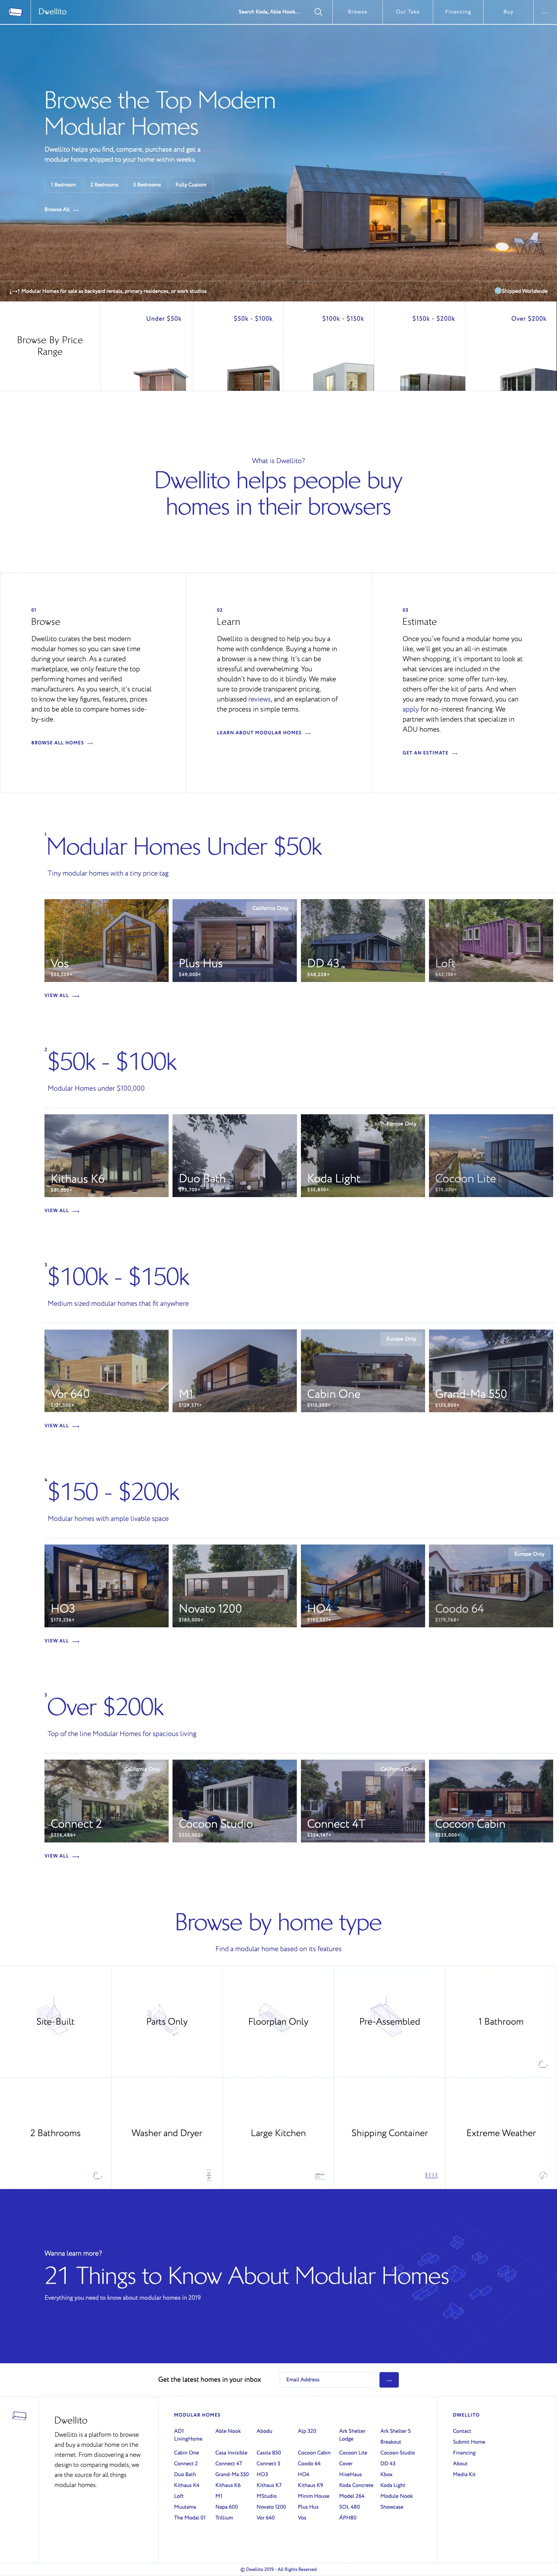 Dwellito Landing Page Example: Explore the top Modular Homes of 2019 for sale. Dwellito is a modular home marketplace featuring over 45 modern Prefab designs. Browse by design, floorplan, bedroom count, price range, and more.